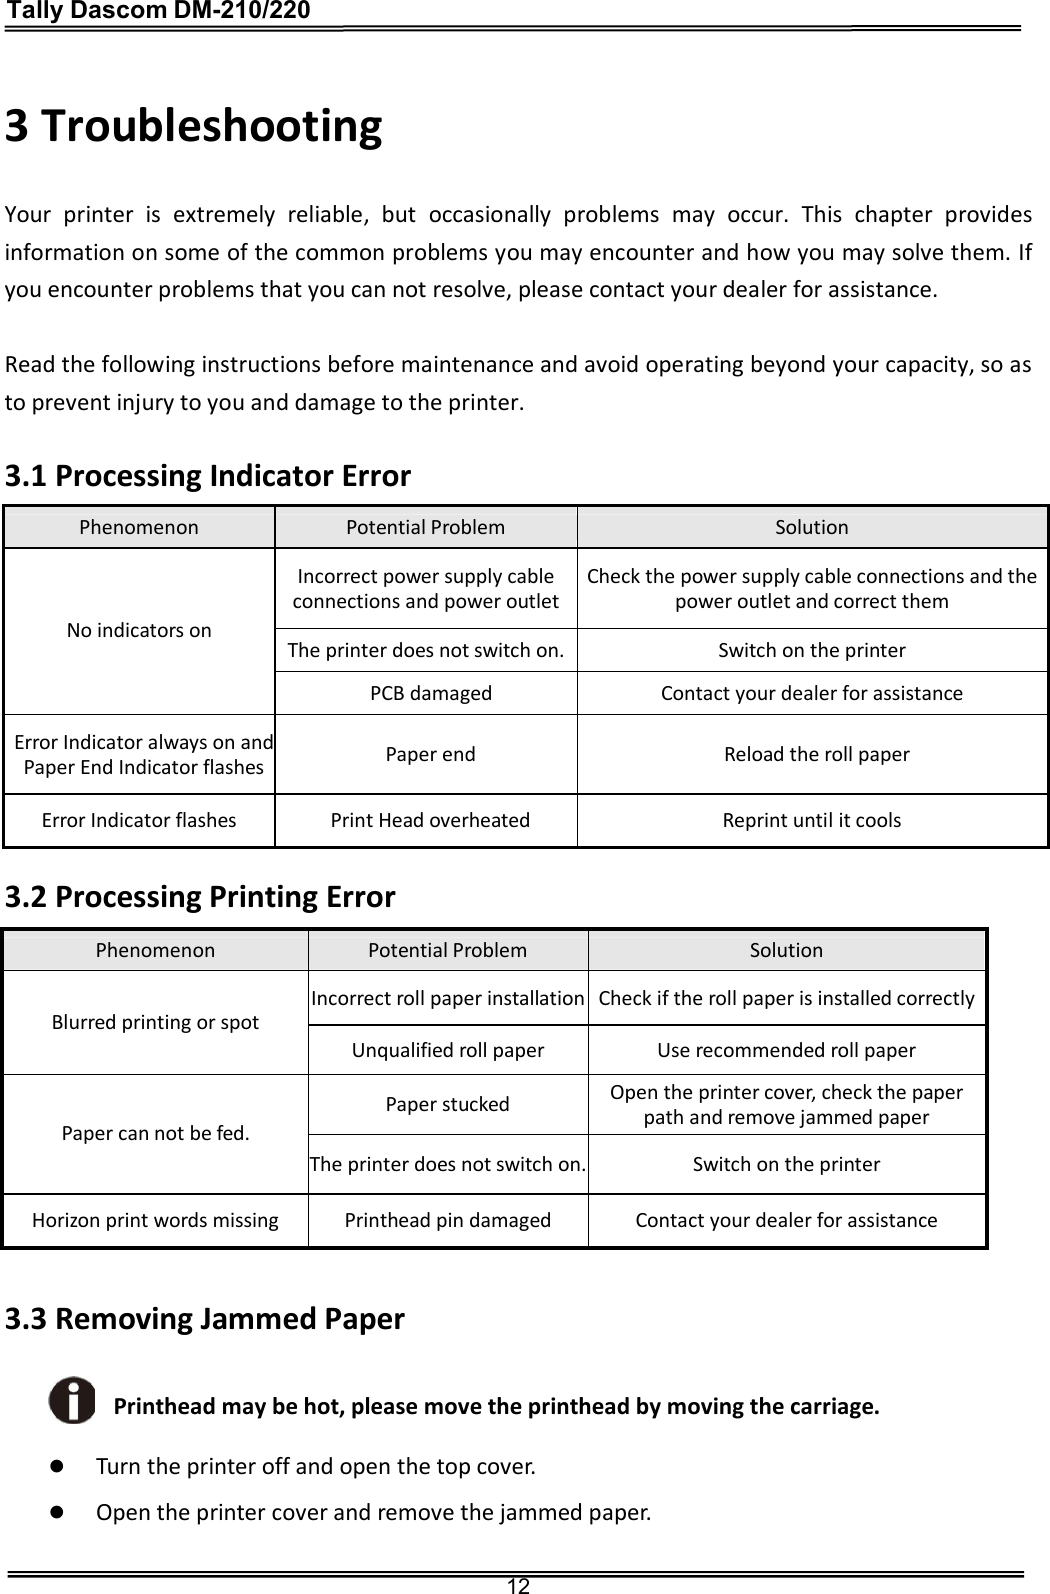 Tally Dascom DM-210/220  12  3 Troubleshooting    Your  printer  is  extremely  reliable,  but  occasionally  problems  may  occur.  This  chapter  provides information on some of the common problems you may encounter and how you may solve them. If you encounter problems that you can not resolve, please contact your dealer for assistance.    Read the following instructions before maintenance and avoid operating beyond your capacity, so as to prevent injury to you and damage to the printer.    3.1 Processing Indicator Error  3.2 Processing Printing Error   3.3 Removing Jammed Paper   Printhead may be hot, please move the printhead by moving the carriage.   Turn the printer off and open the top cover.  Open the printer cover and remove the jammed paper.  Phenomenon  Potential Problem  Solution Incorrect power supply cable connections and power outlet Check the power supply cable connections and the power outlet and correct them The printer does not switch on. Switch on the printer No indicators on PCB damaged  Contact your dealer for assistance Error Indicator always on and Paper End Indicator flashes Paper end  Reload the roll paper Error Indicator flashes  Print Head overheated  Reprint until it cools Phenomenon  Potential Problem  Solution Incorrect roll paper installation Check if the roll paper is installed correctly Blurred printing or spot Unqualified roll paper  Use recommended roll paper Paper stucked  Open the printer cover, check the paper path and remove jammed paper Paper can not be fed. The printer does not switch on. Switch on the printer Horizon print words missing  Printhead pin damaged  Contact your dealer for assistance 